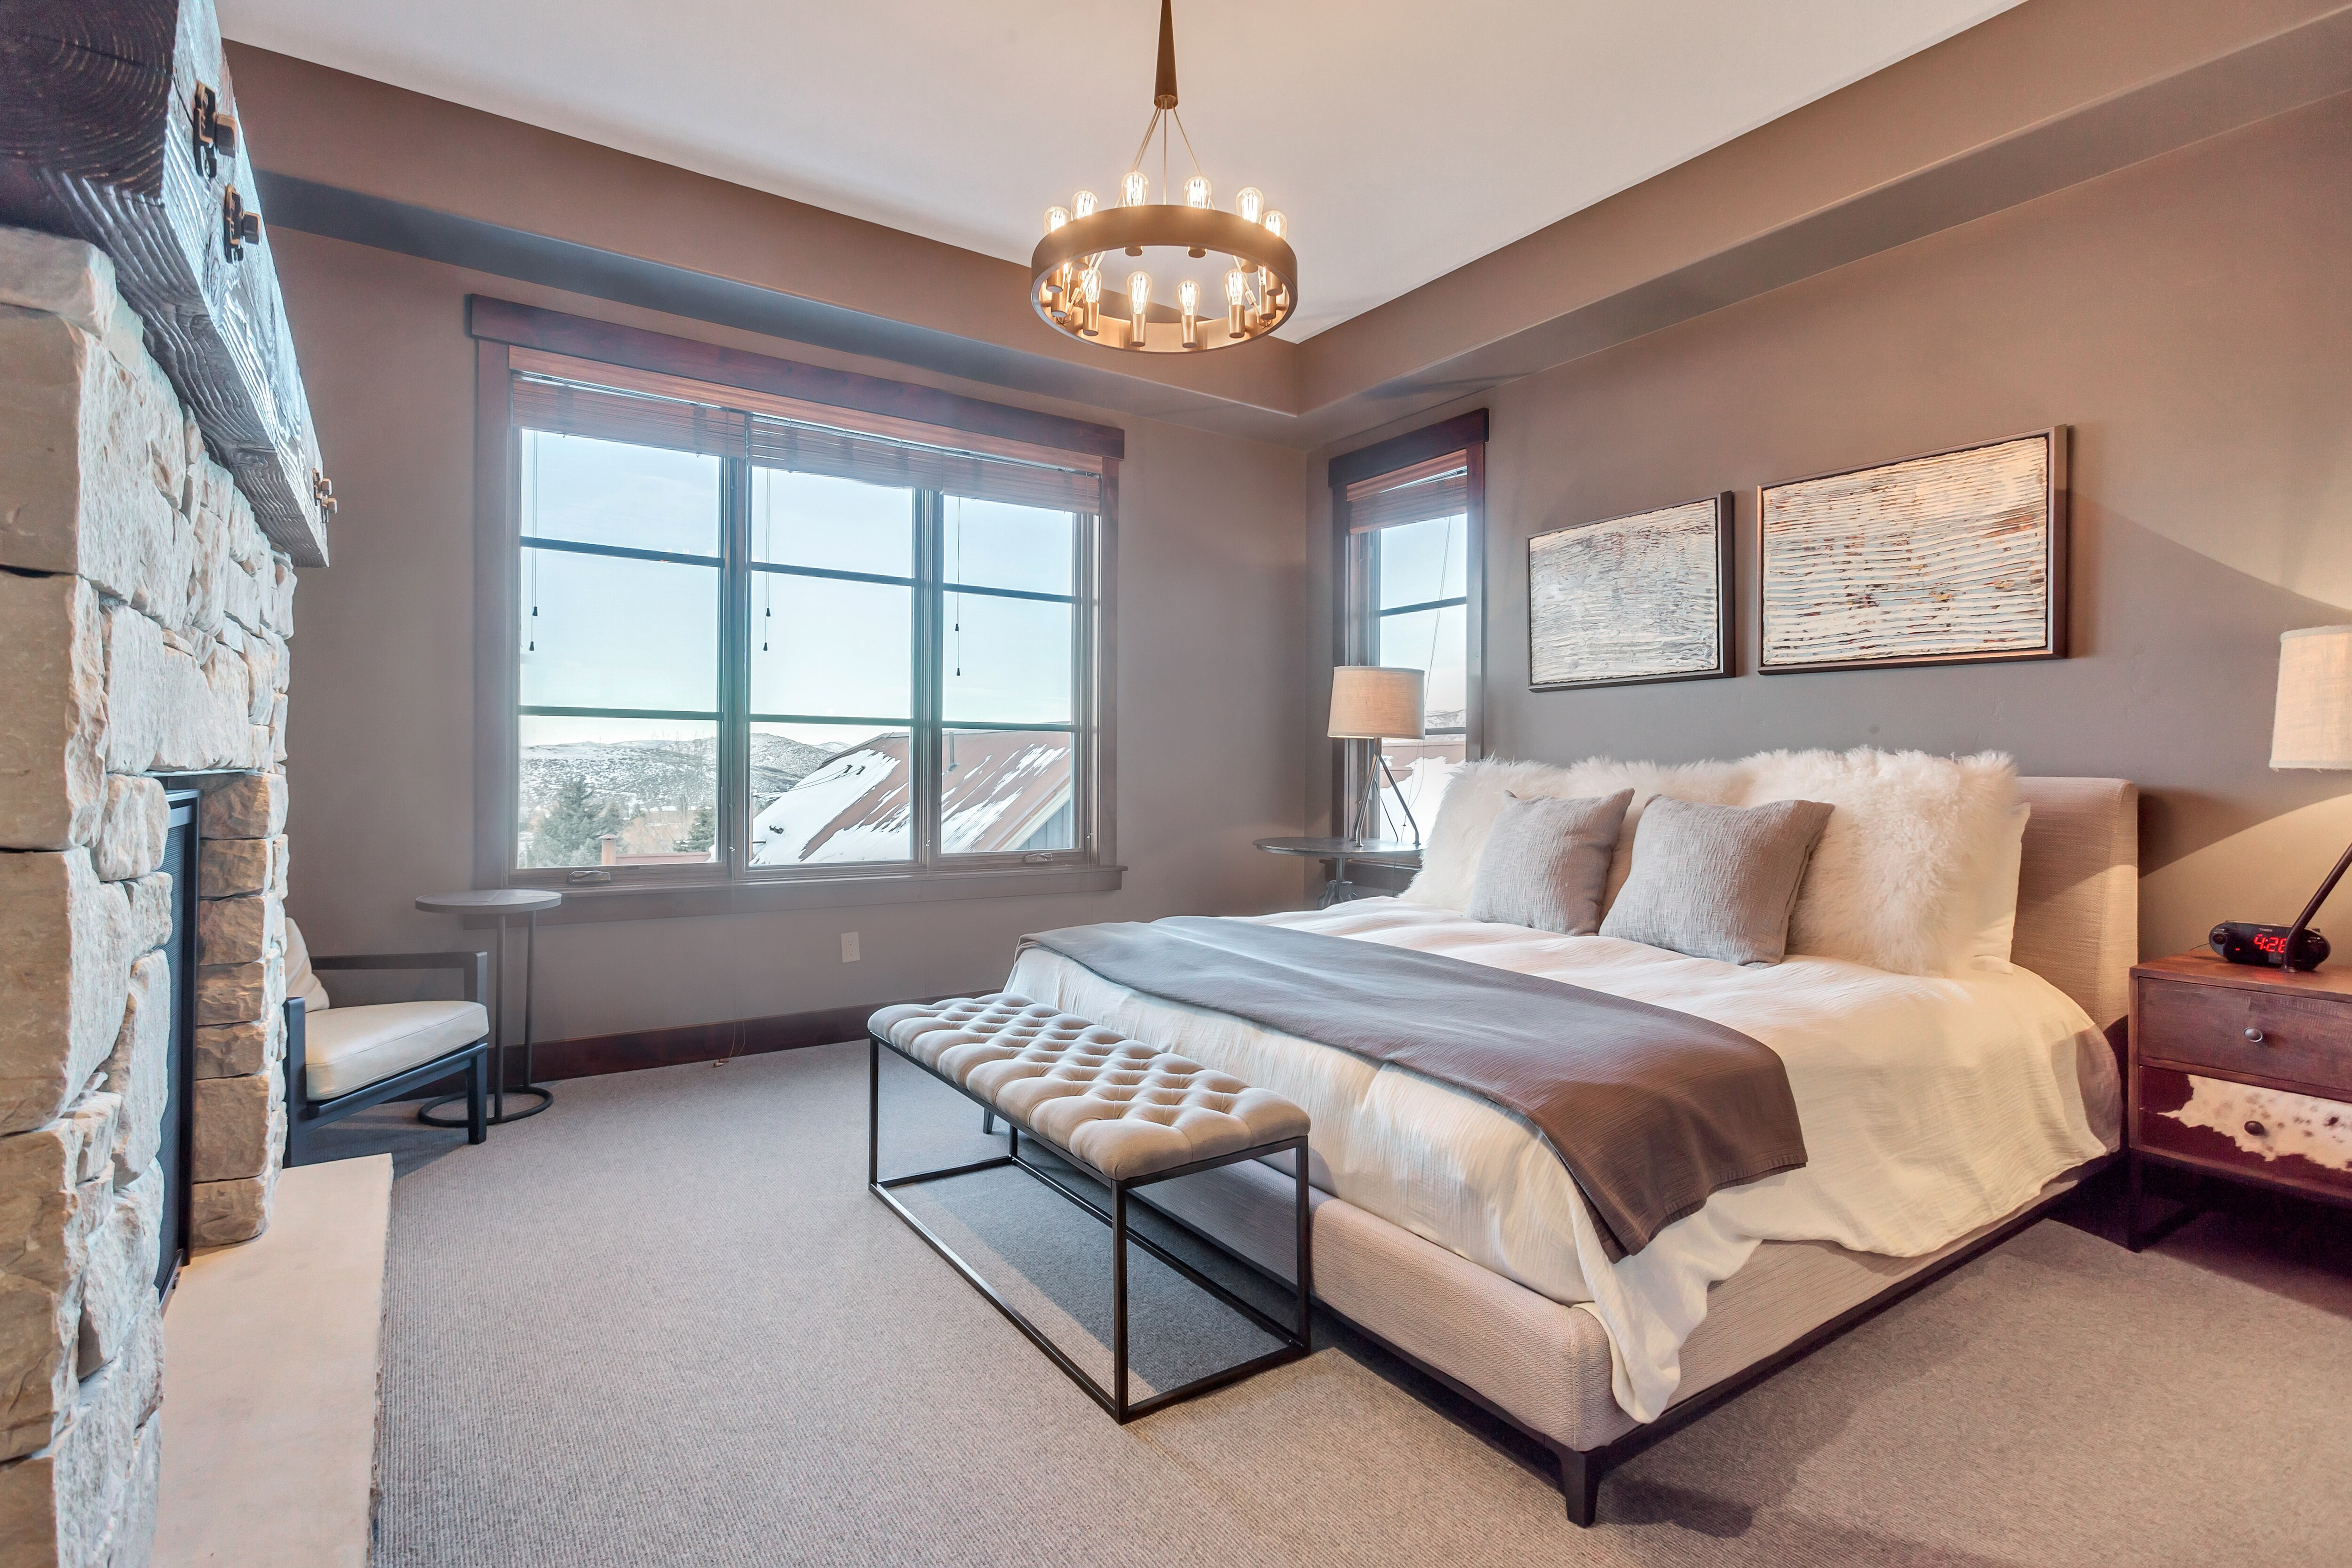 Grand Master Suite with a King Bed, Warm Gas Fireplace, TV and Mountain Views